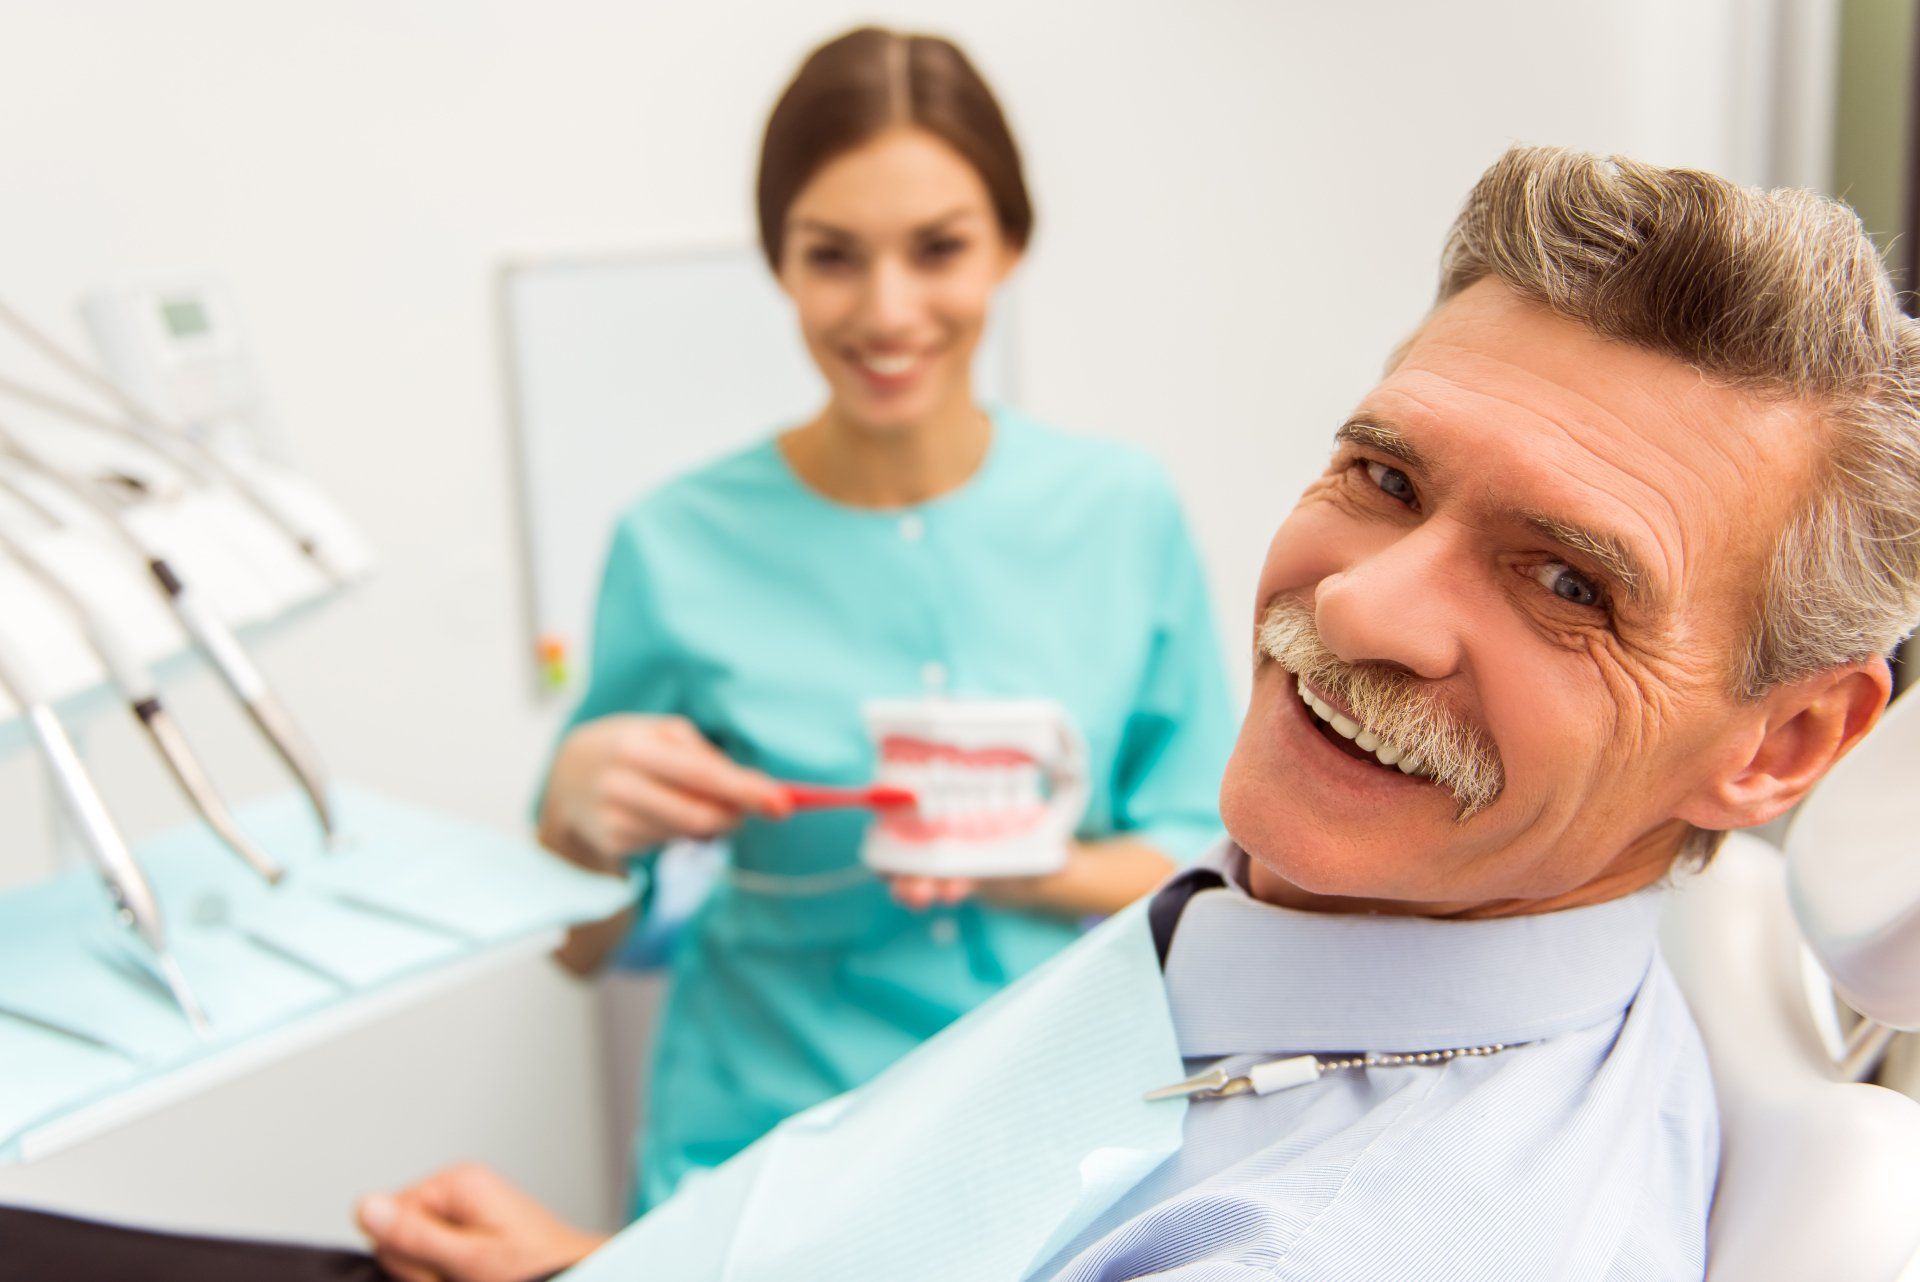 a man in a dental chair is smiling while a woman holds a model of teeth